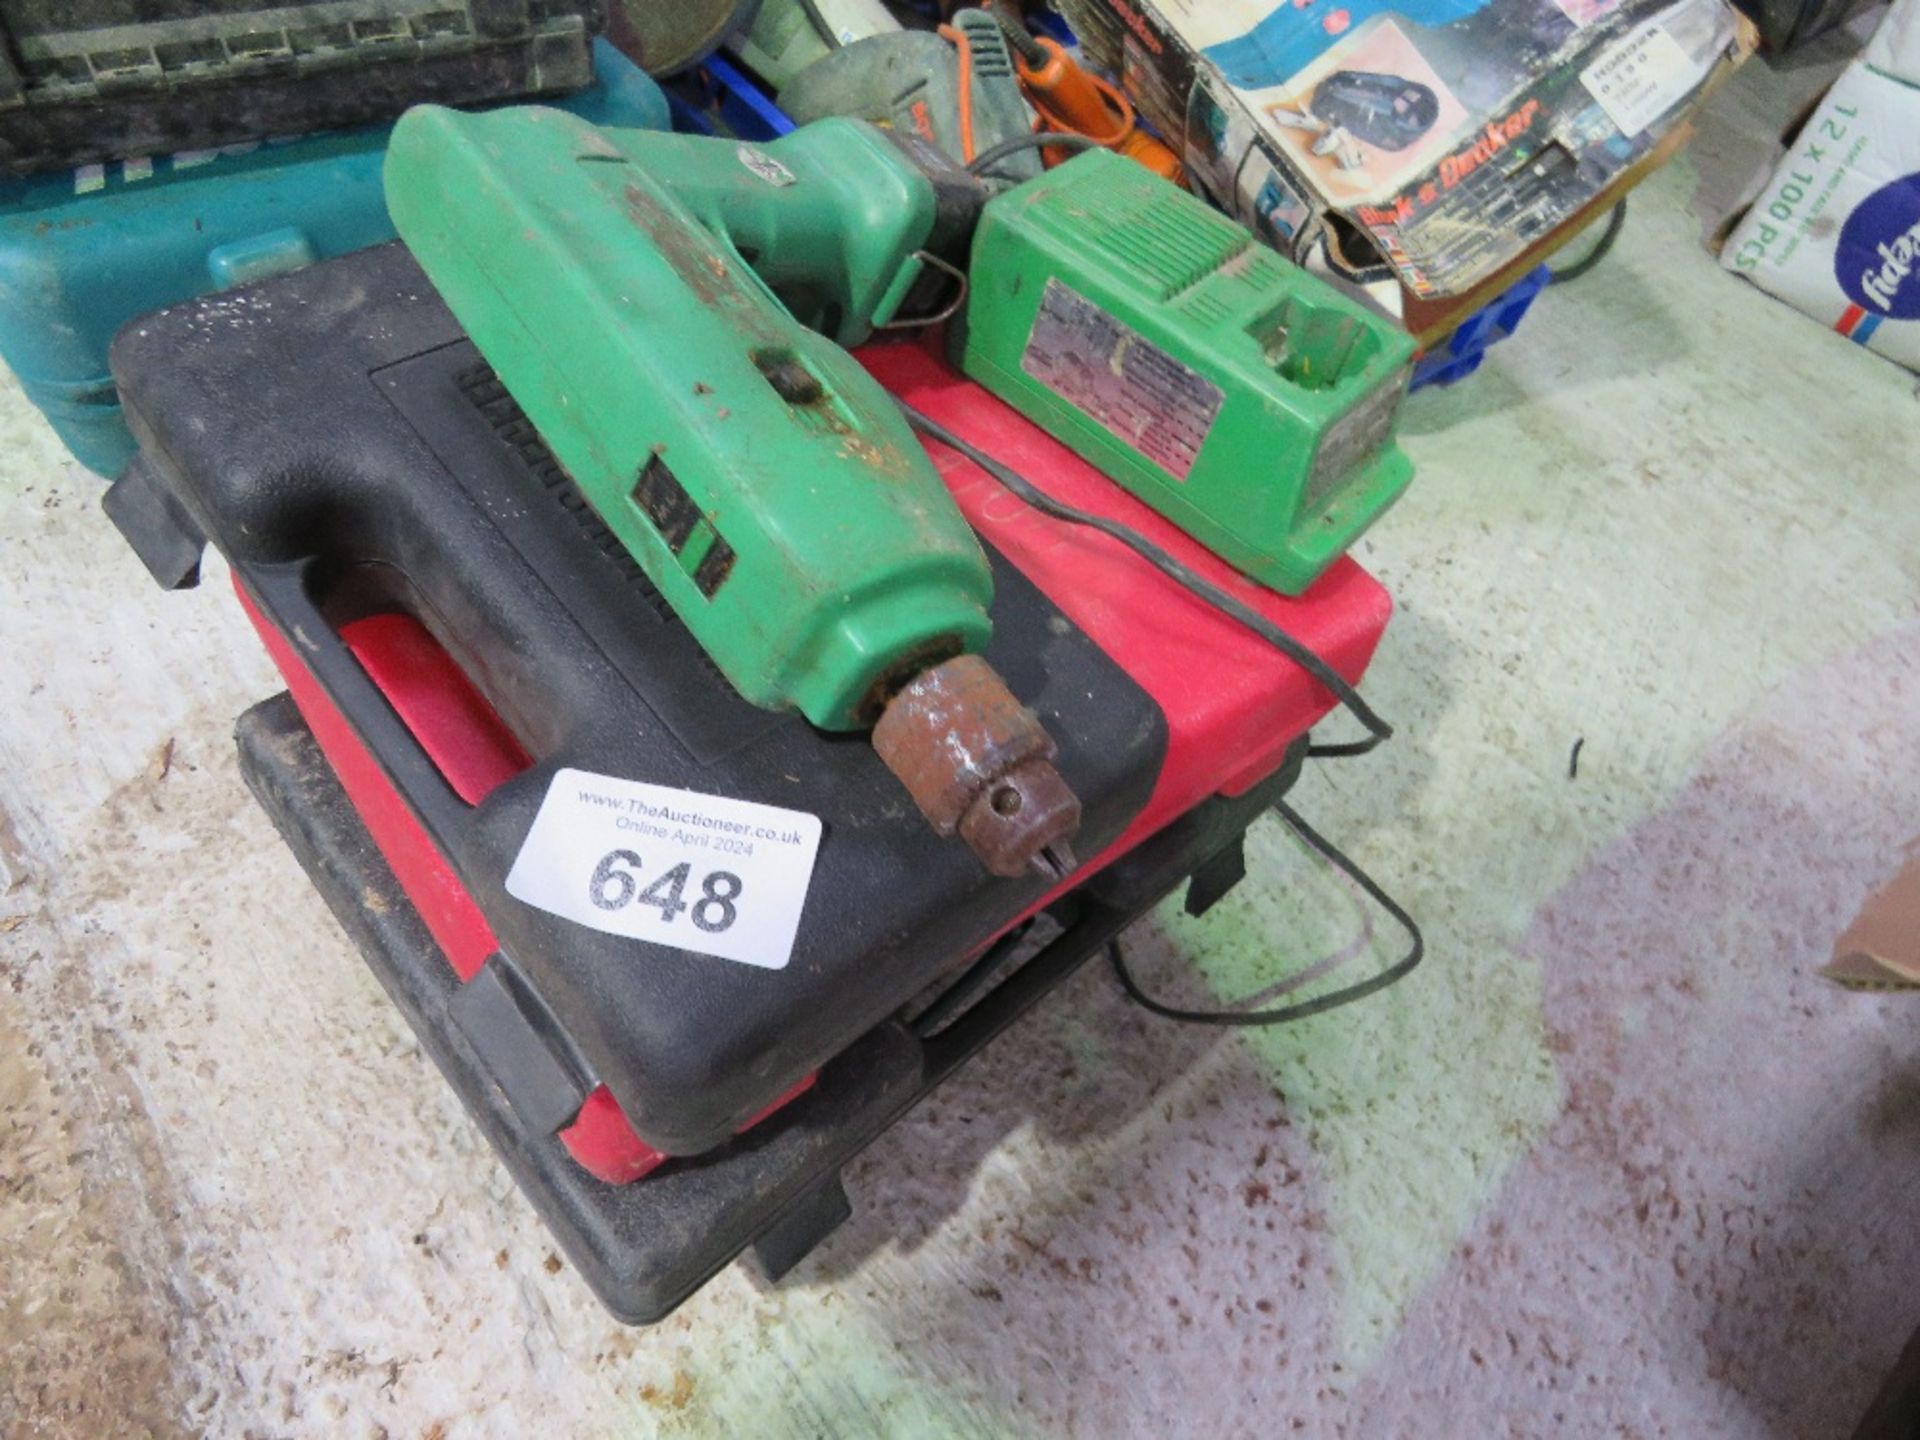 4 X BATTERY DRILLS PLUS A MINI SCREWDRIVER. ....THIS LOT IS SOLD UNDER THE AUCTIONEERS MARGIN SCHEME